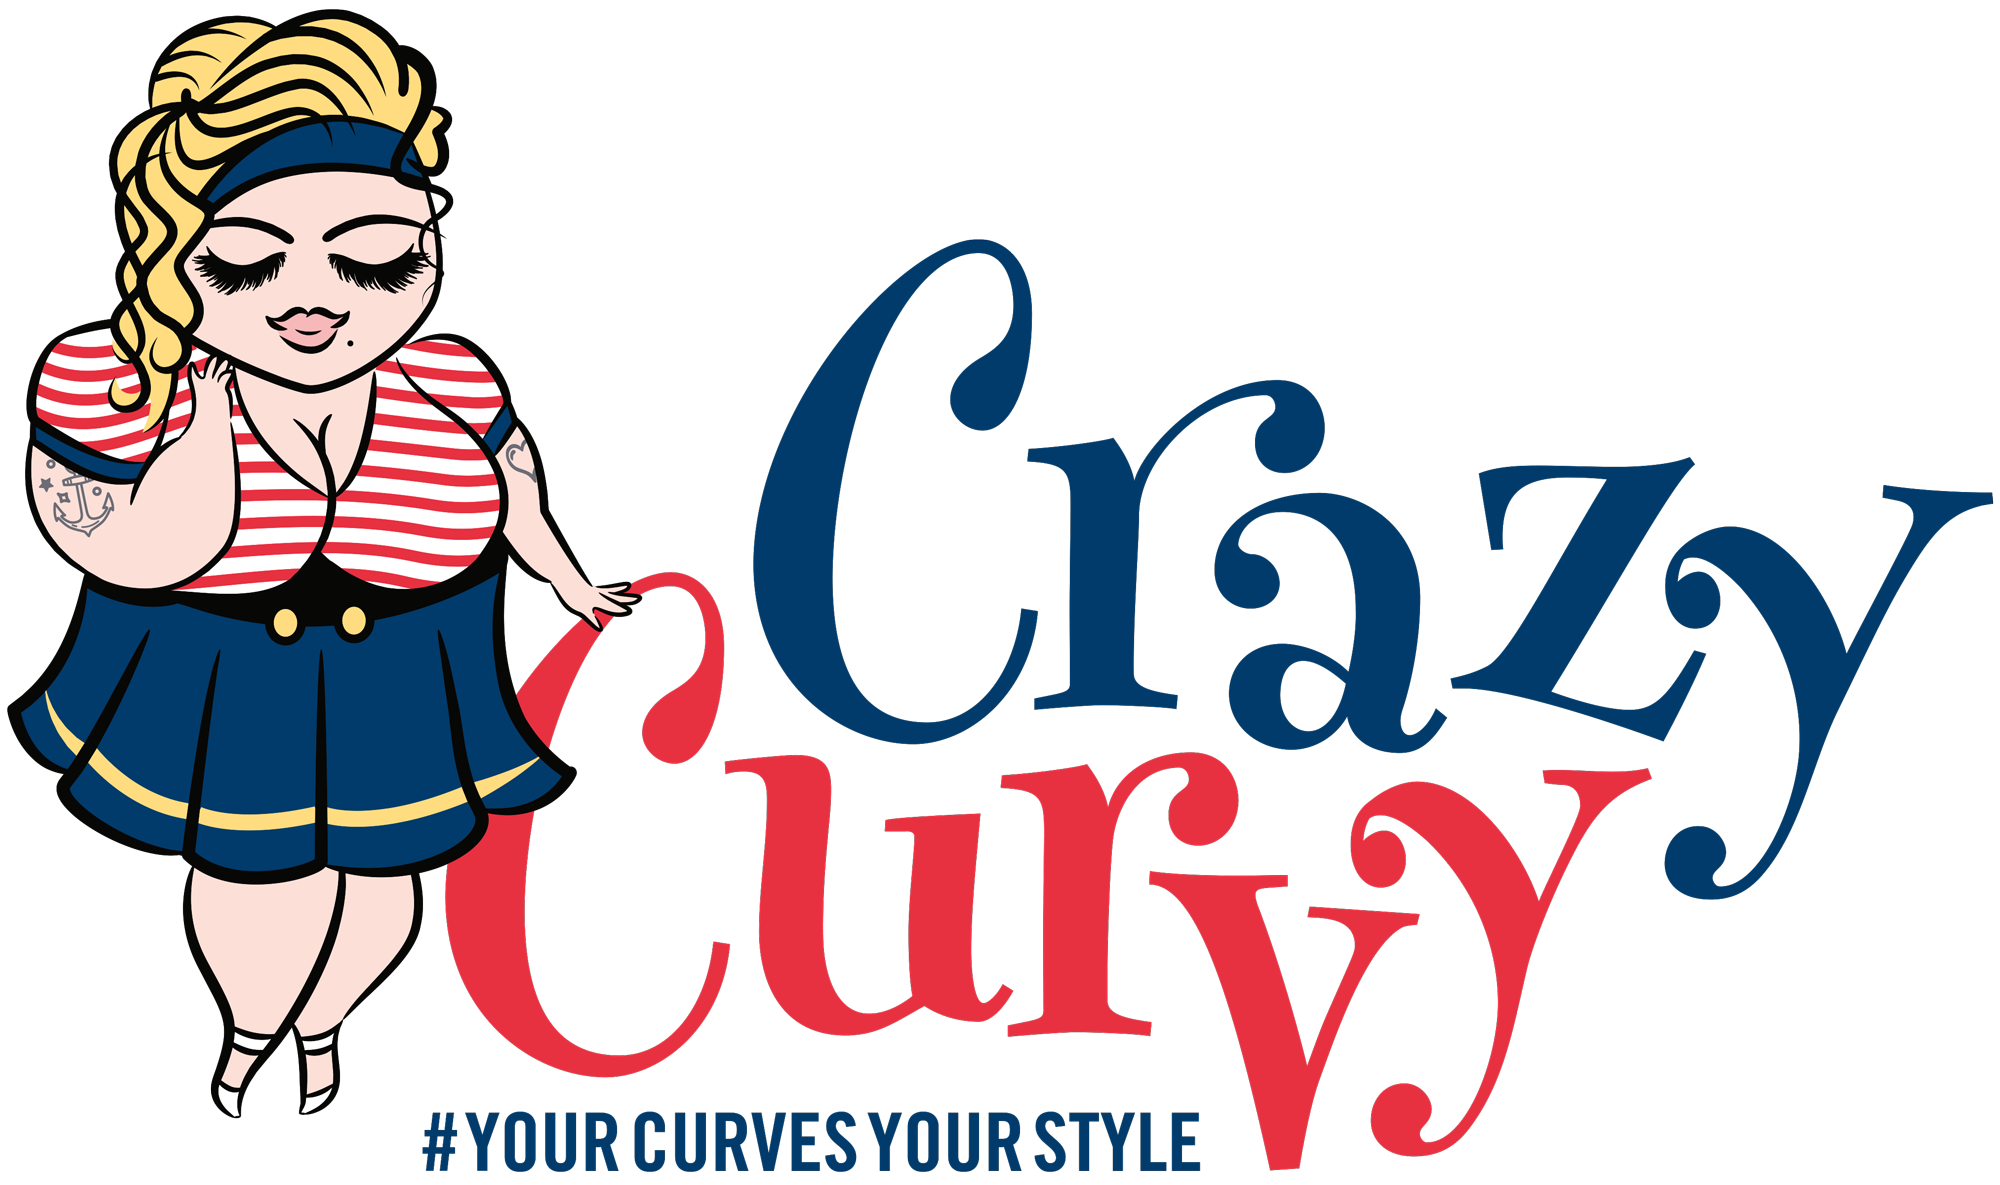 crazy-curvy - #yourcurvesyourstyle